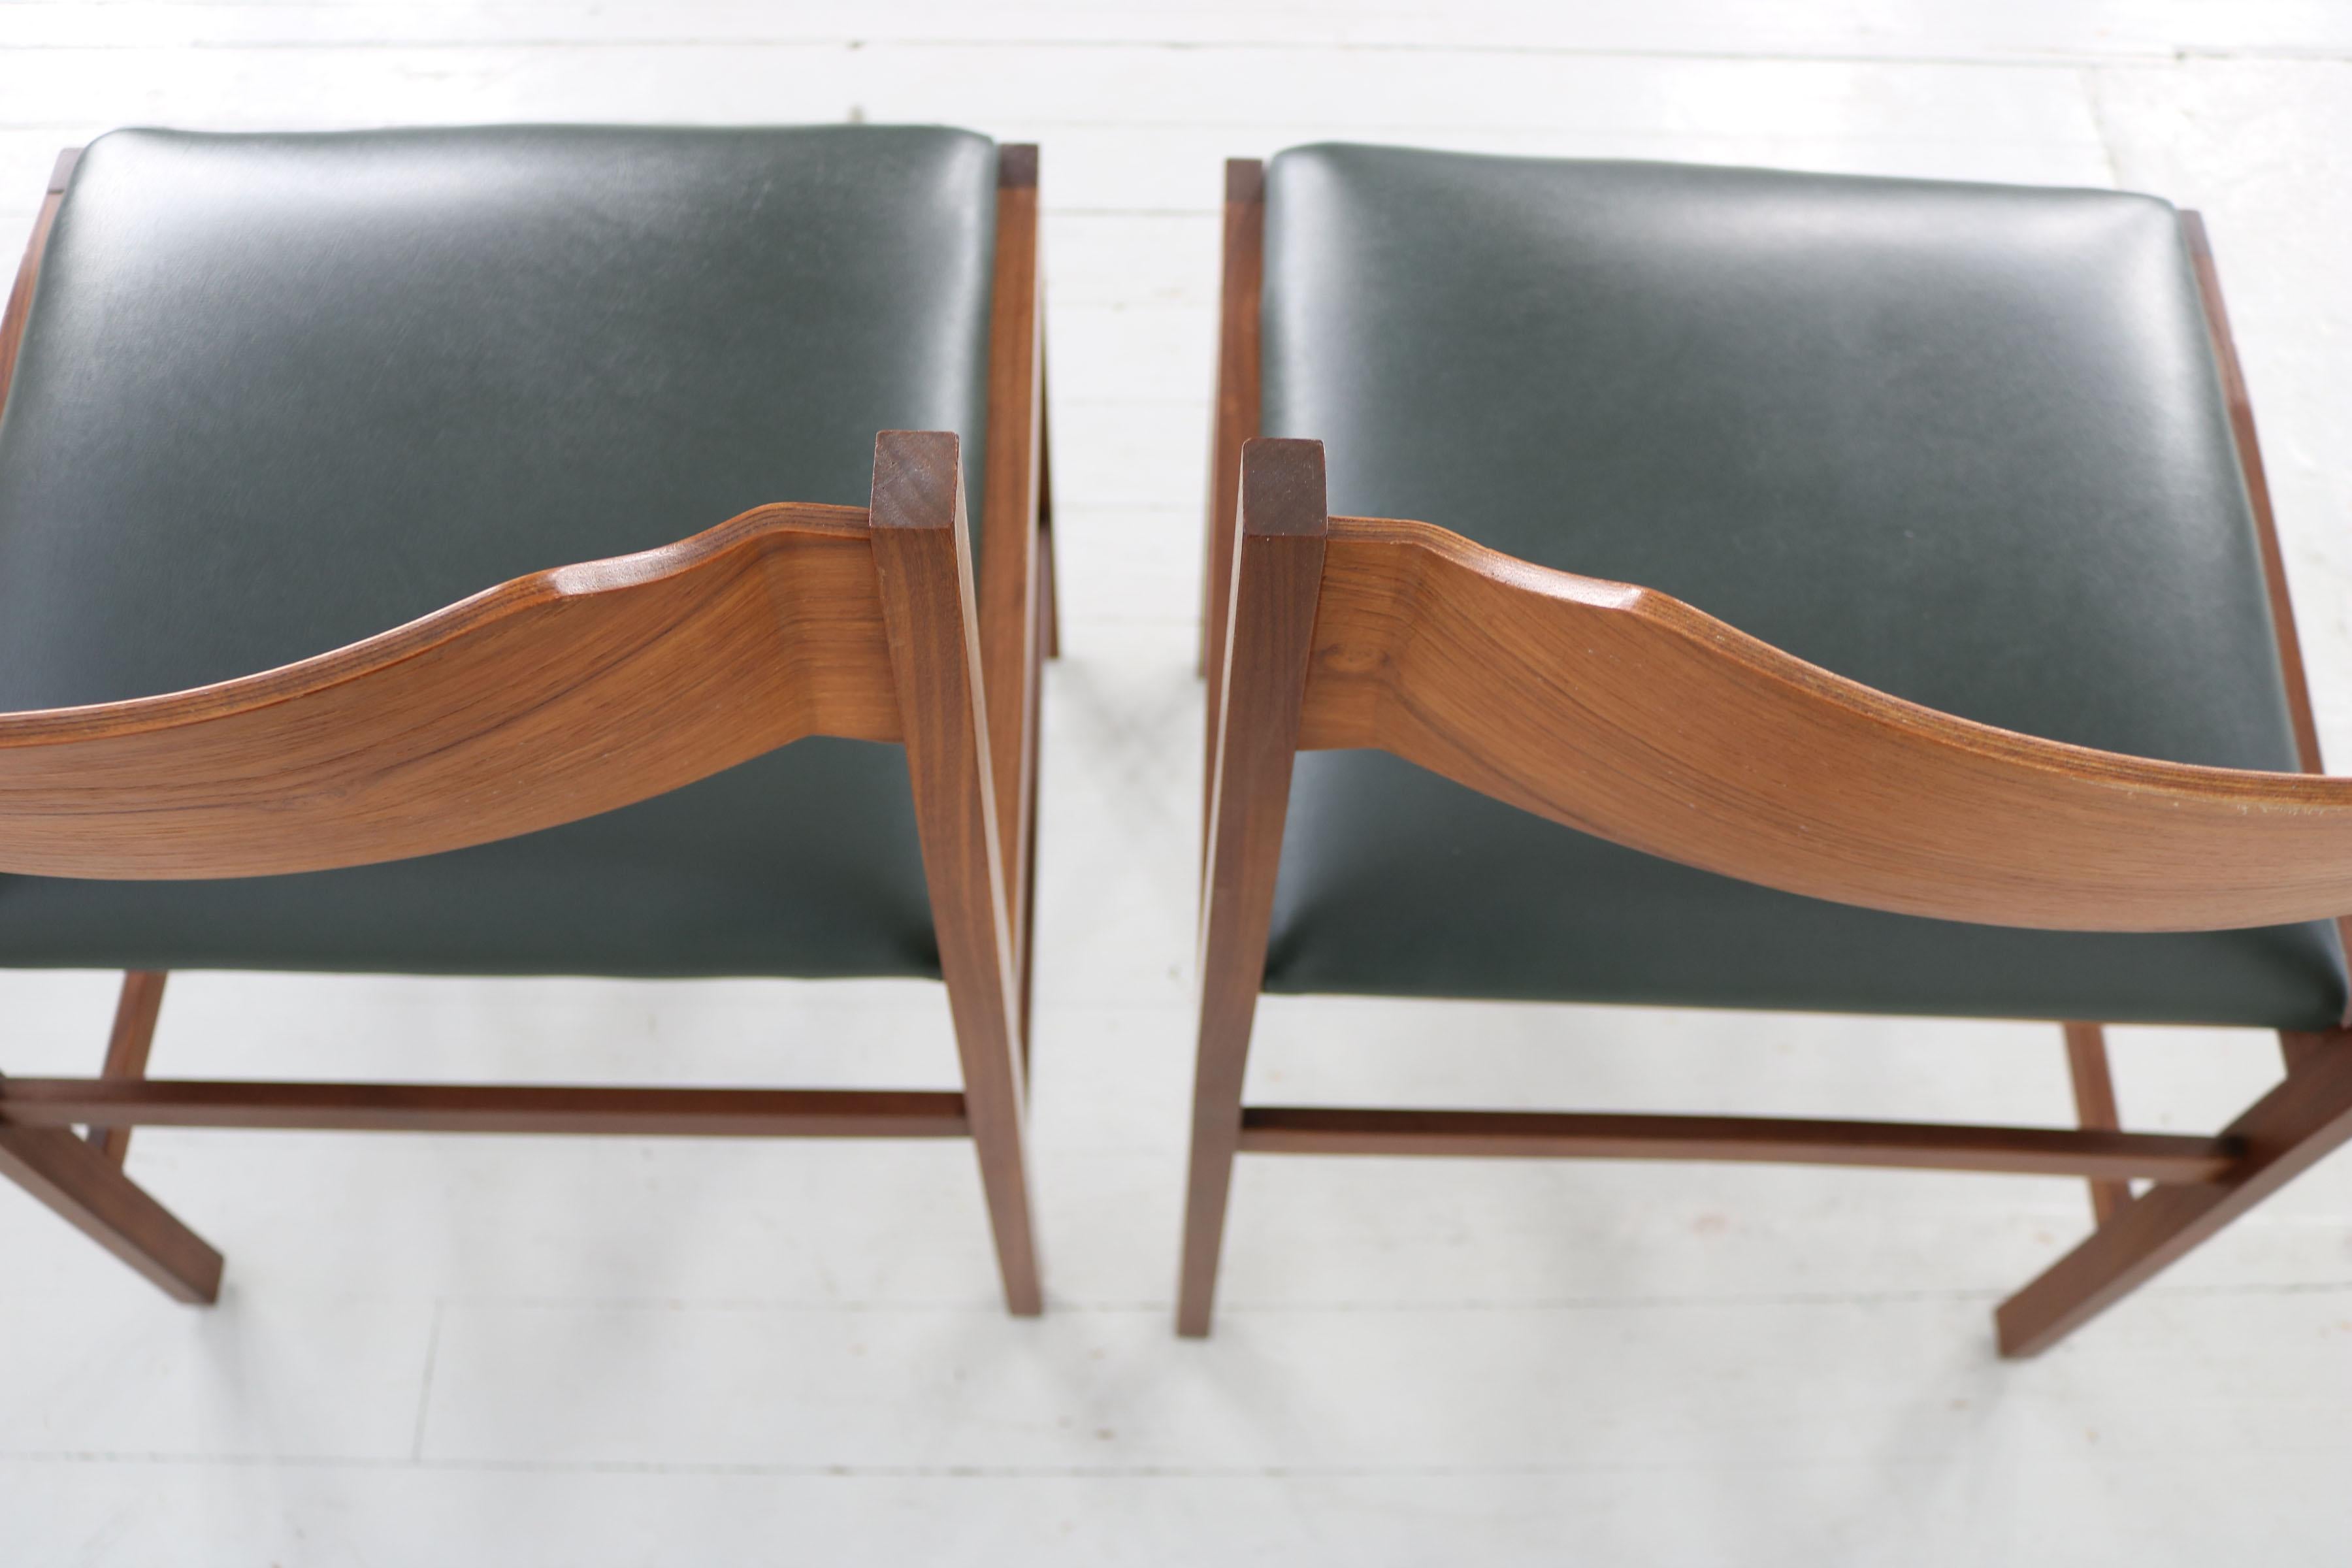 Set of 3 Solid Wooden Chairs with Dark Green Leatherette Upholstery, 1960s For Sale 12